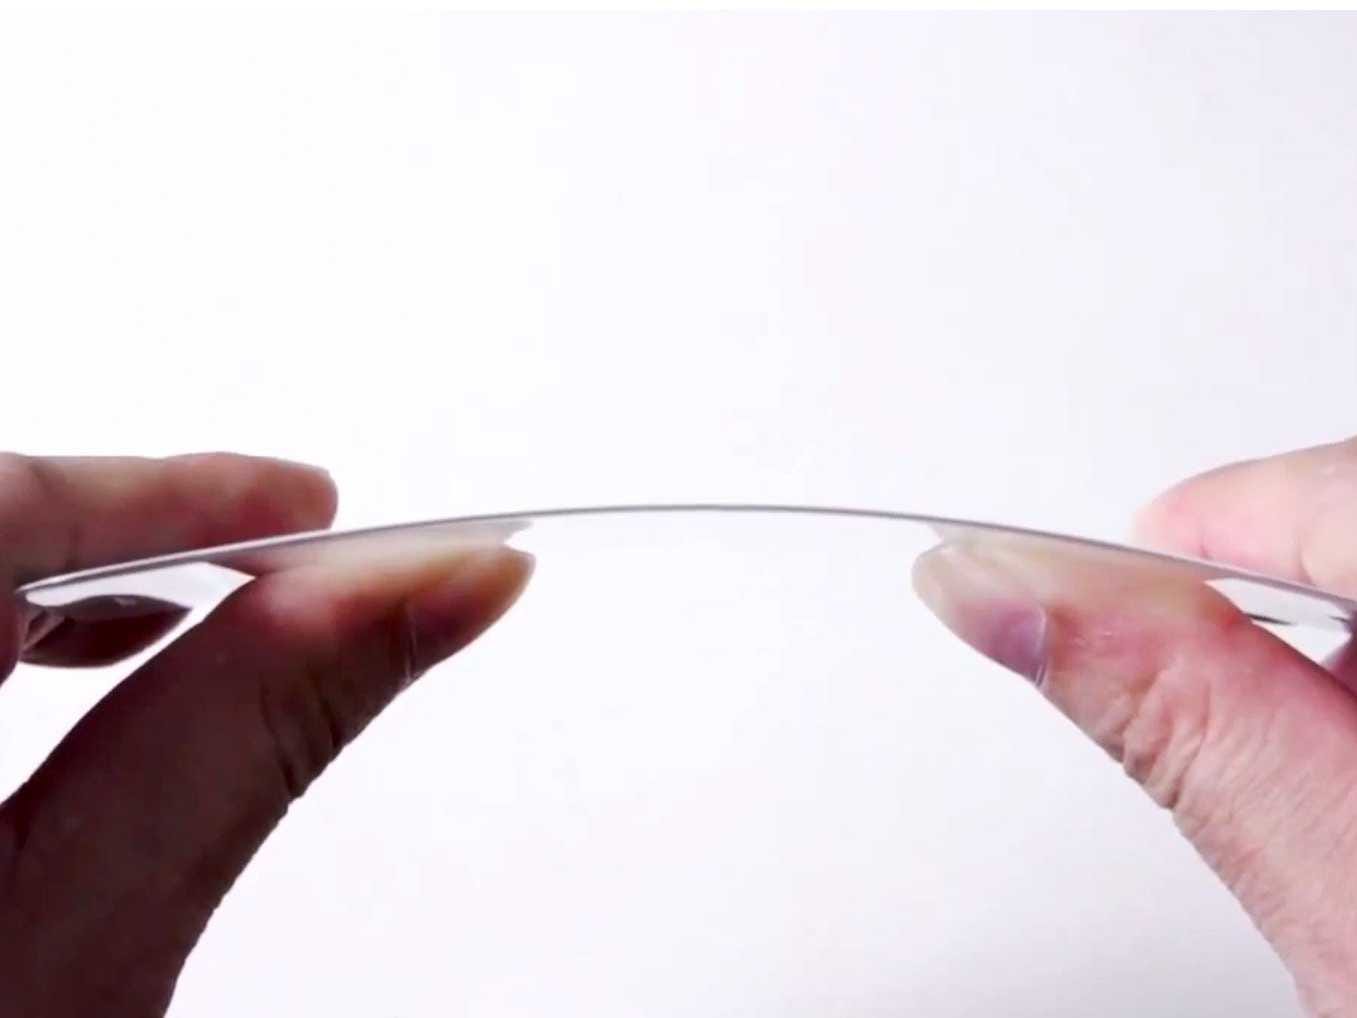 leaked-video-of-what-could-be-the-iphone-6s-flexible-sapphire-screen-cover.jpg